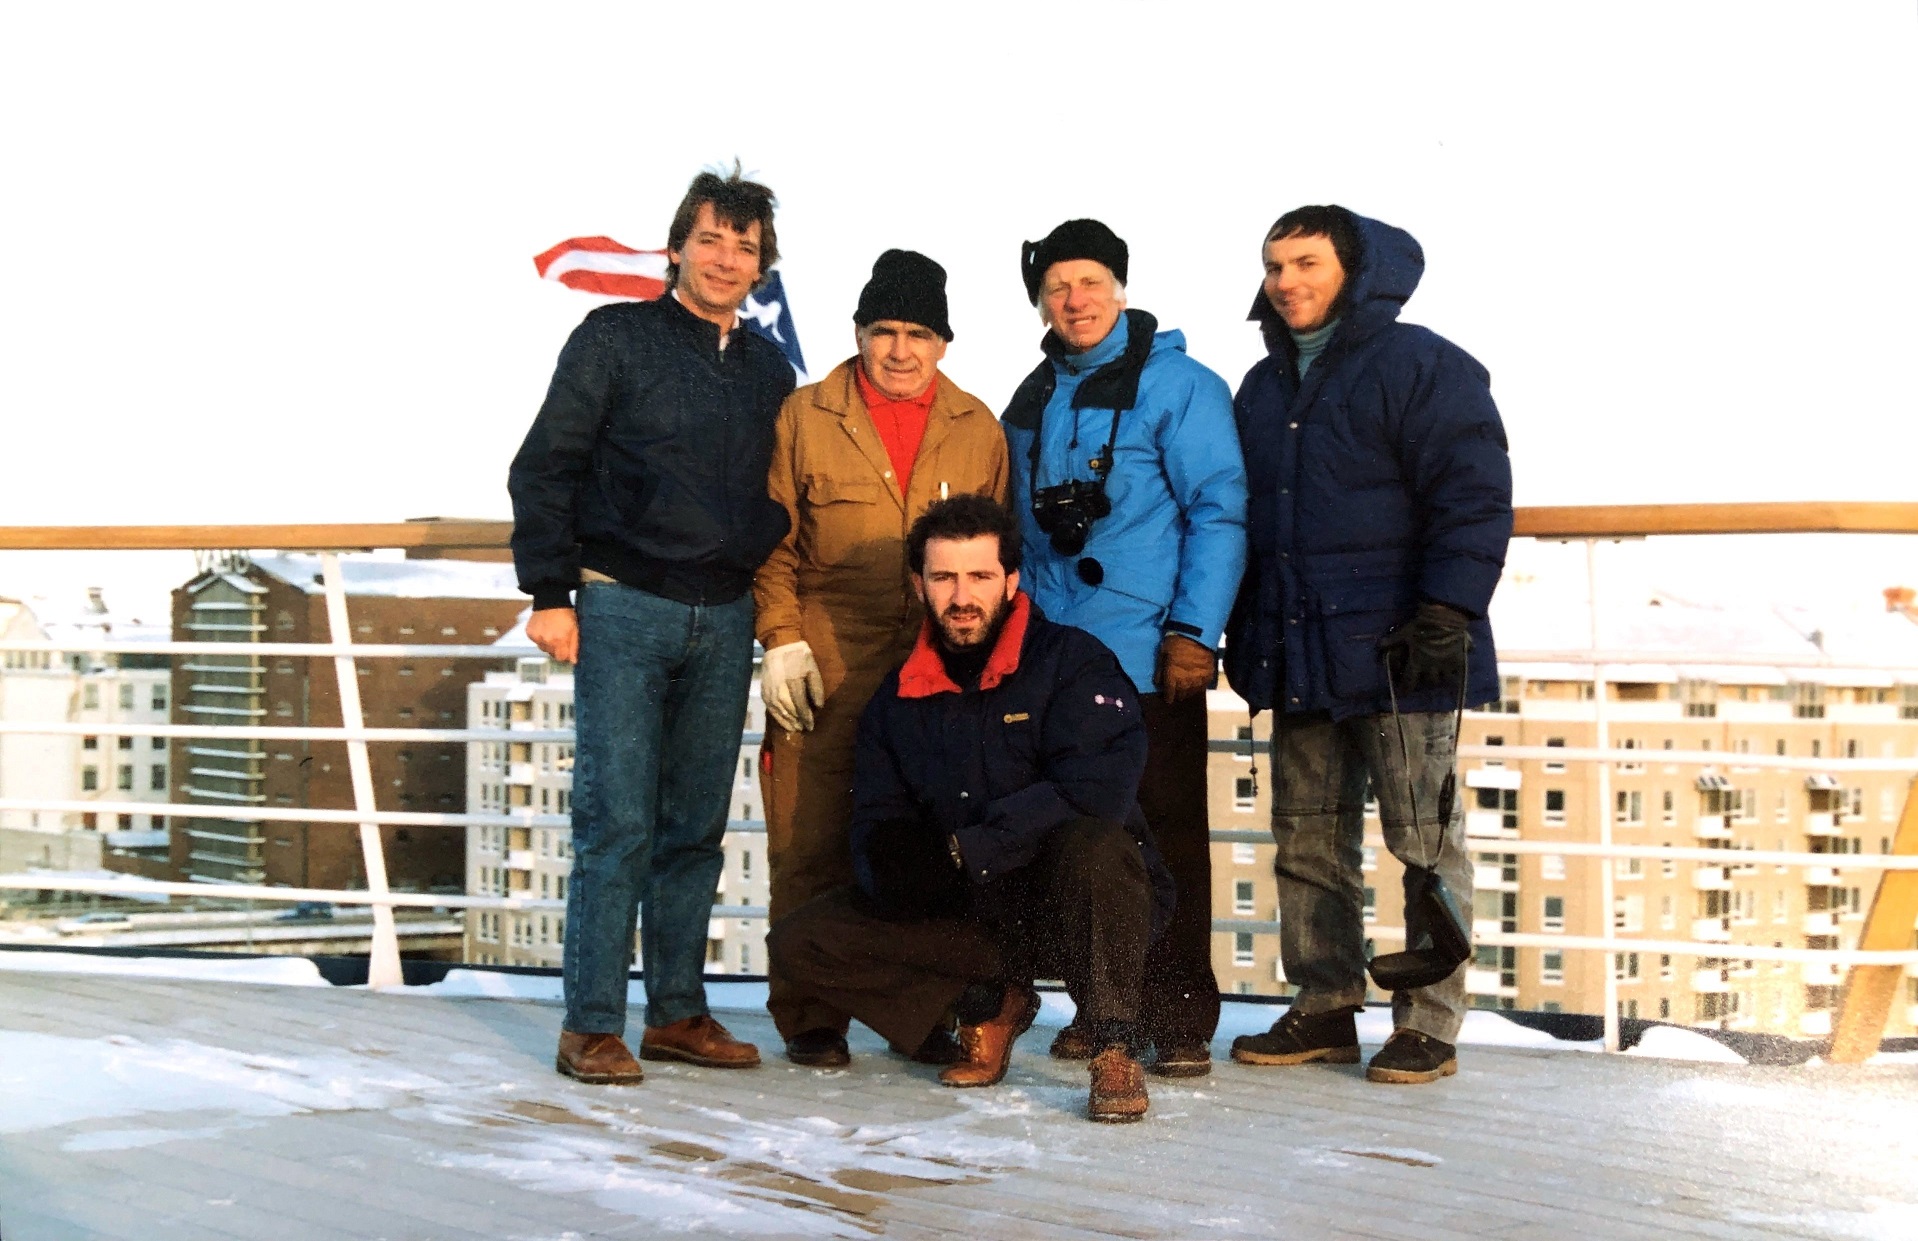 Carnival Fantasy officers, including inaugural Captain Gavino (standing, second from right) are shown here  in Helsinki during the ship’s construction.